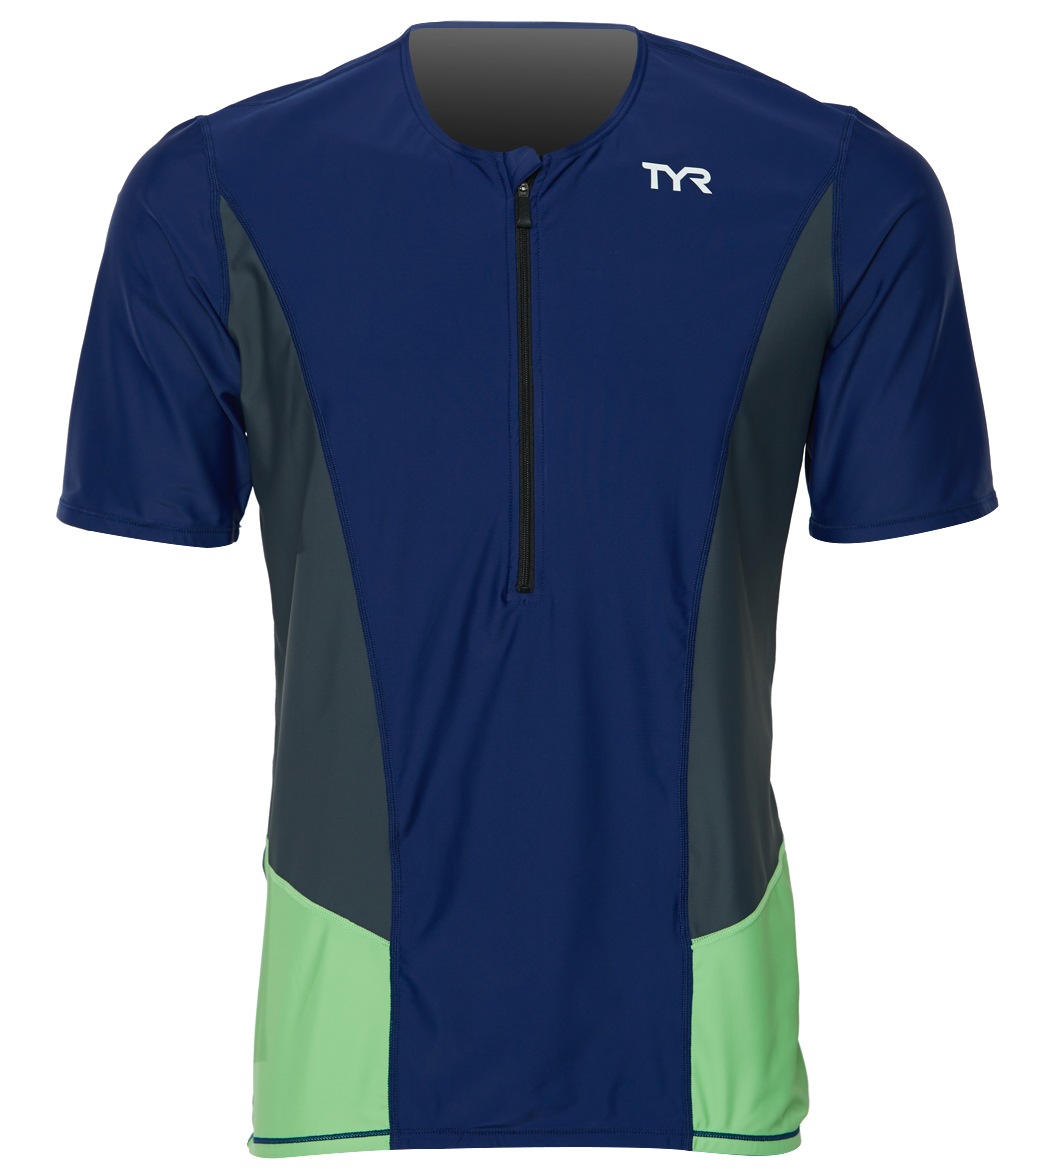 TYR Men's Competitor Short Sleeve Top - Navy/Grey Small - Swimoutlet.com